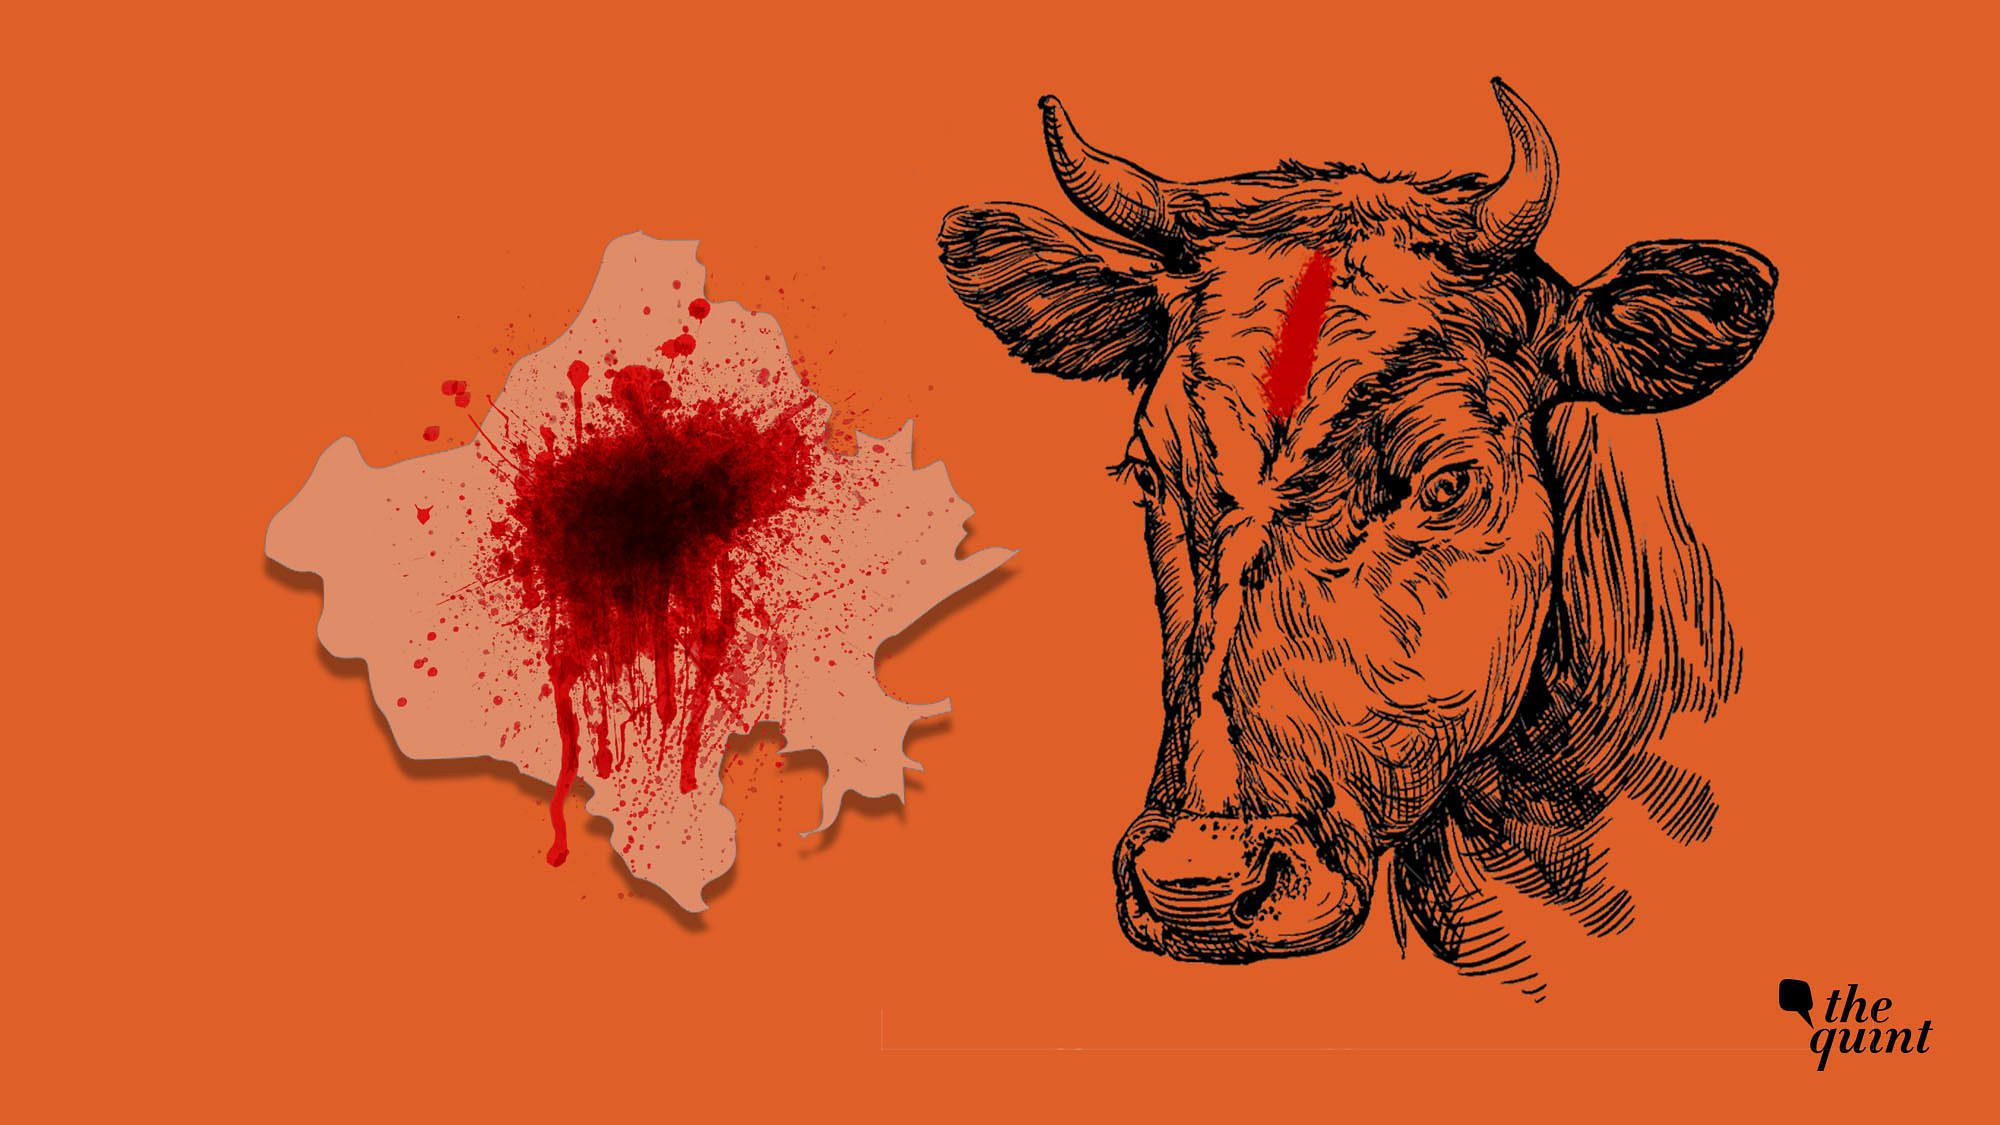 Image depicting ‘cow politics’ and communal violence in Rajasthan, used for representational purposes.